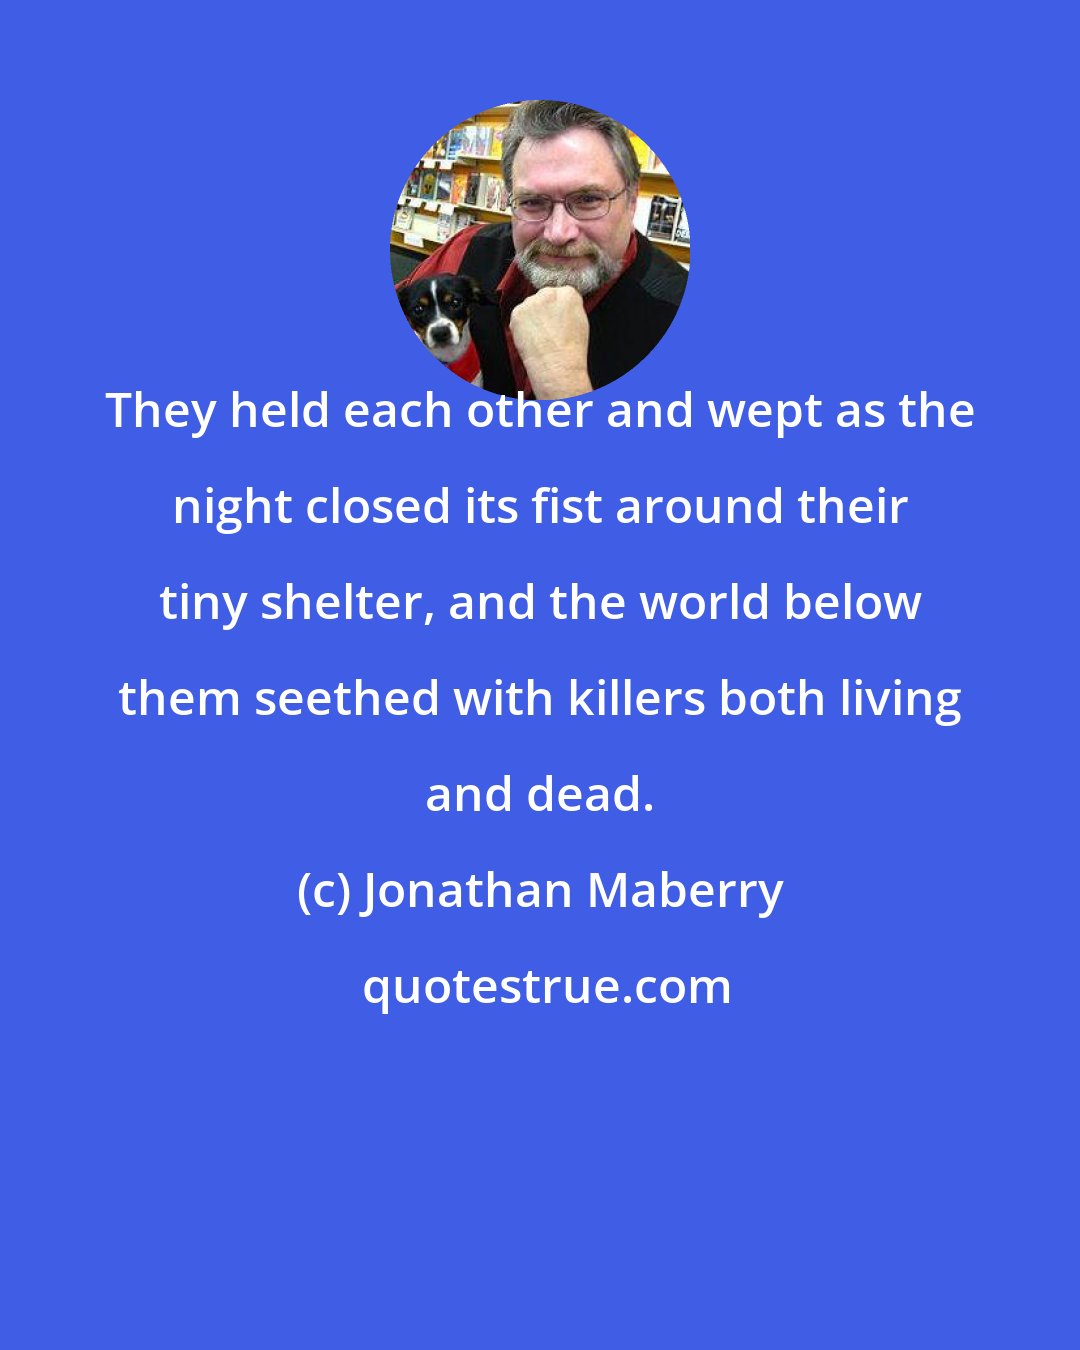 Jonathan Maberry: They held each other and wept as the night closed its fist around their tiny shelter, and the world below them seethed with killers both living and dead.